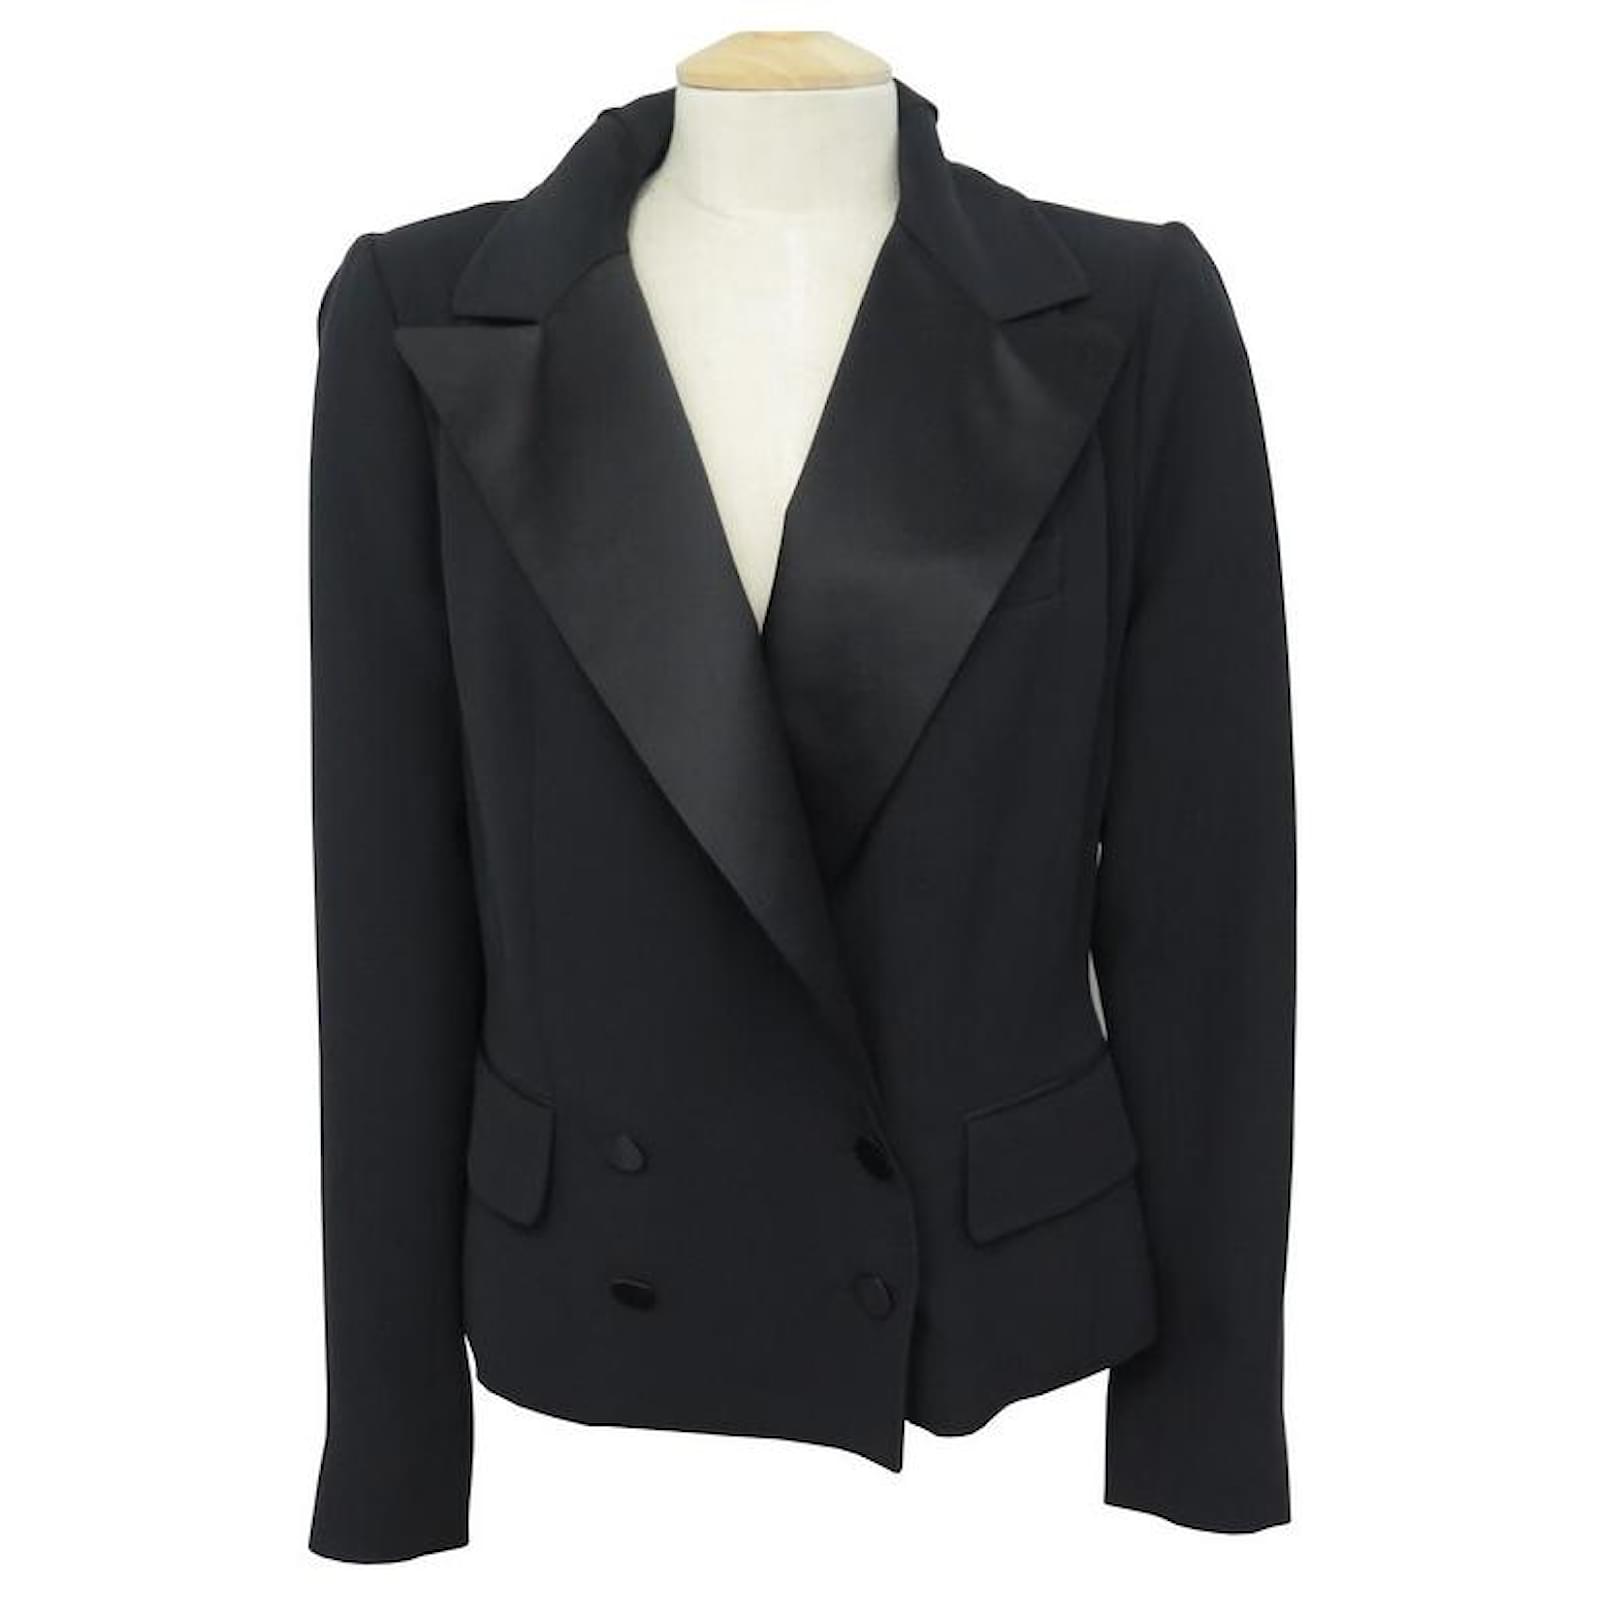 A female version of this Louis Vuitton tuxedo jacket would be AMAZING!